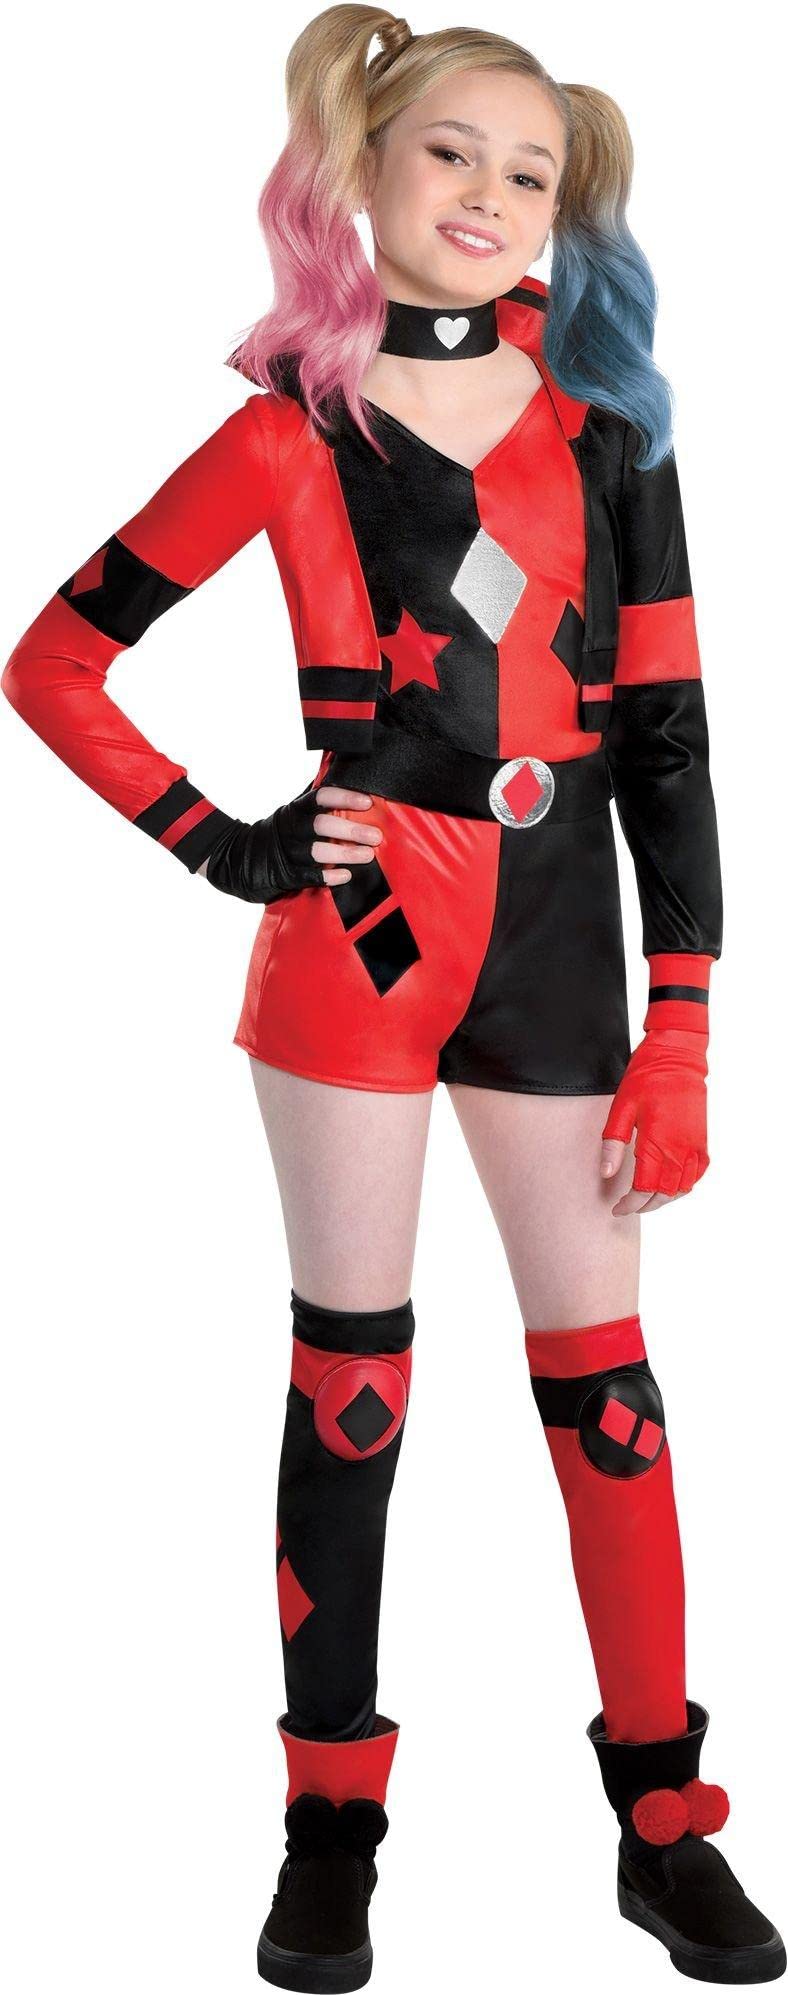 Party City Party city Harley Quinn Halloween costume for girls, Dc comics,  Extra Large, With Romper, choker, gloves and Leg Warmers